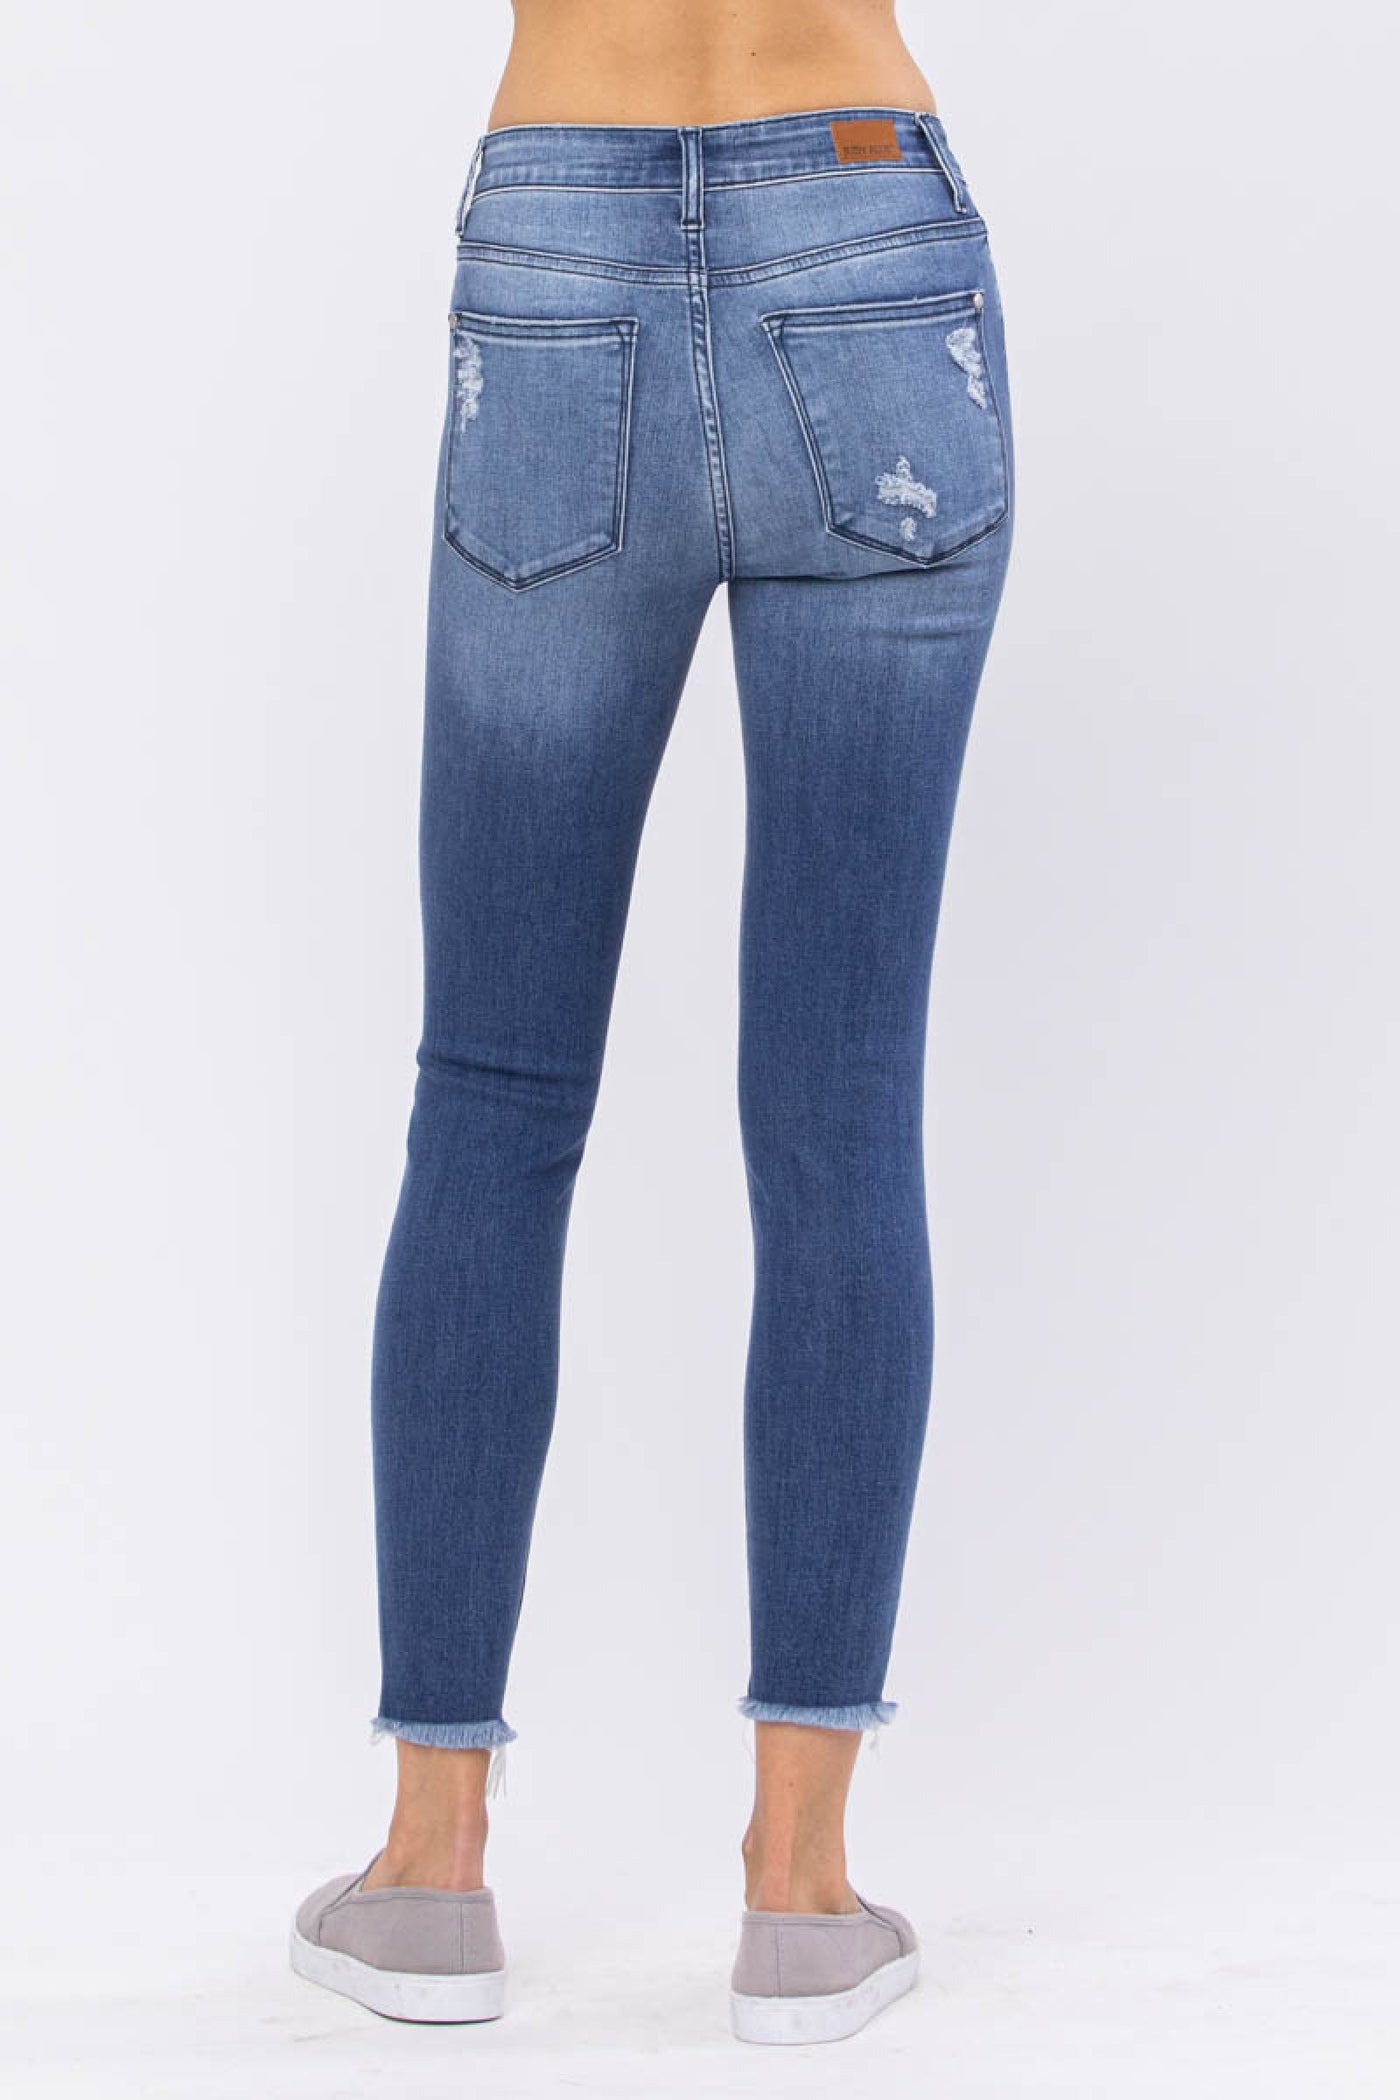 Judy Blue Destroyed Hem Hi-Rise Skinny - Corinne Boutique Family Owned and Operated USA